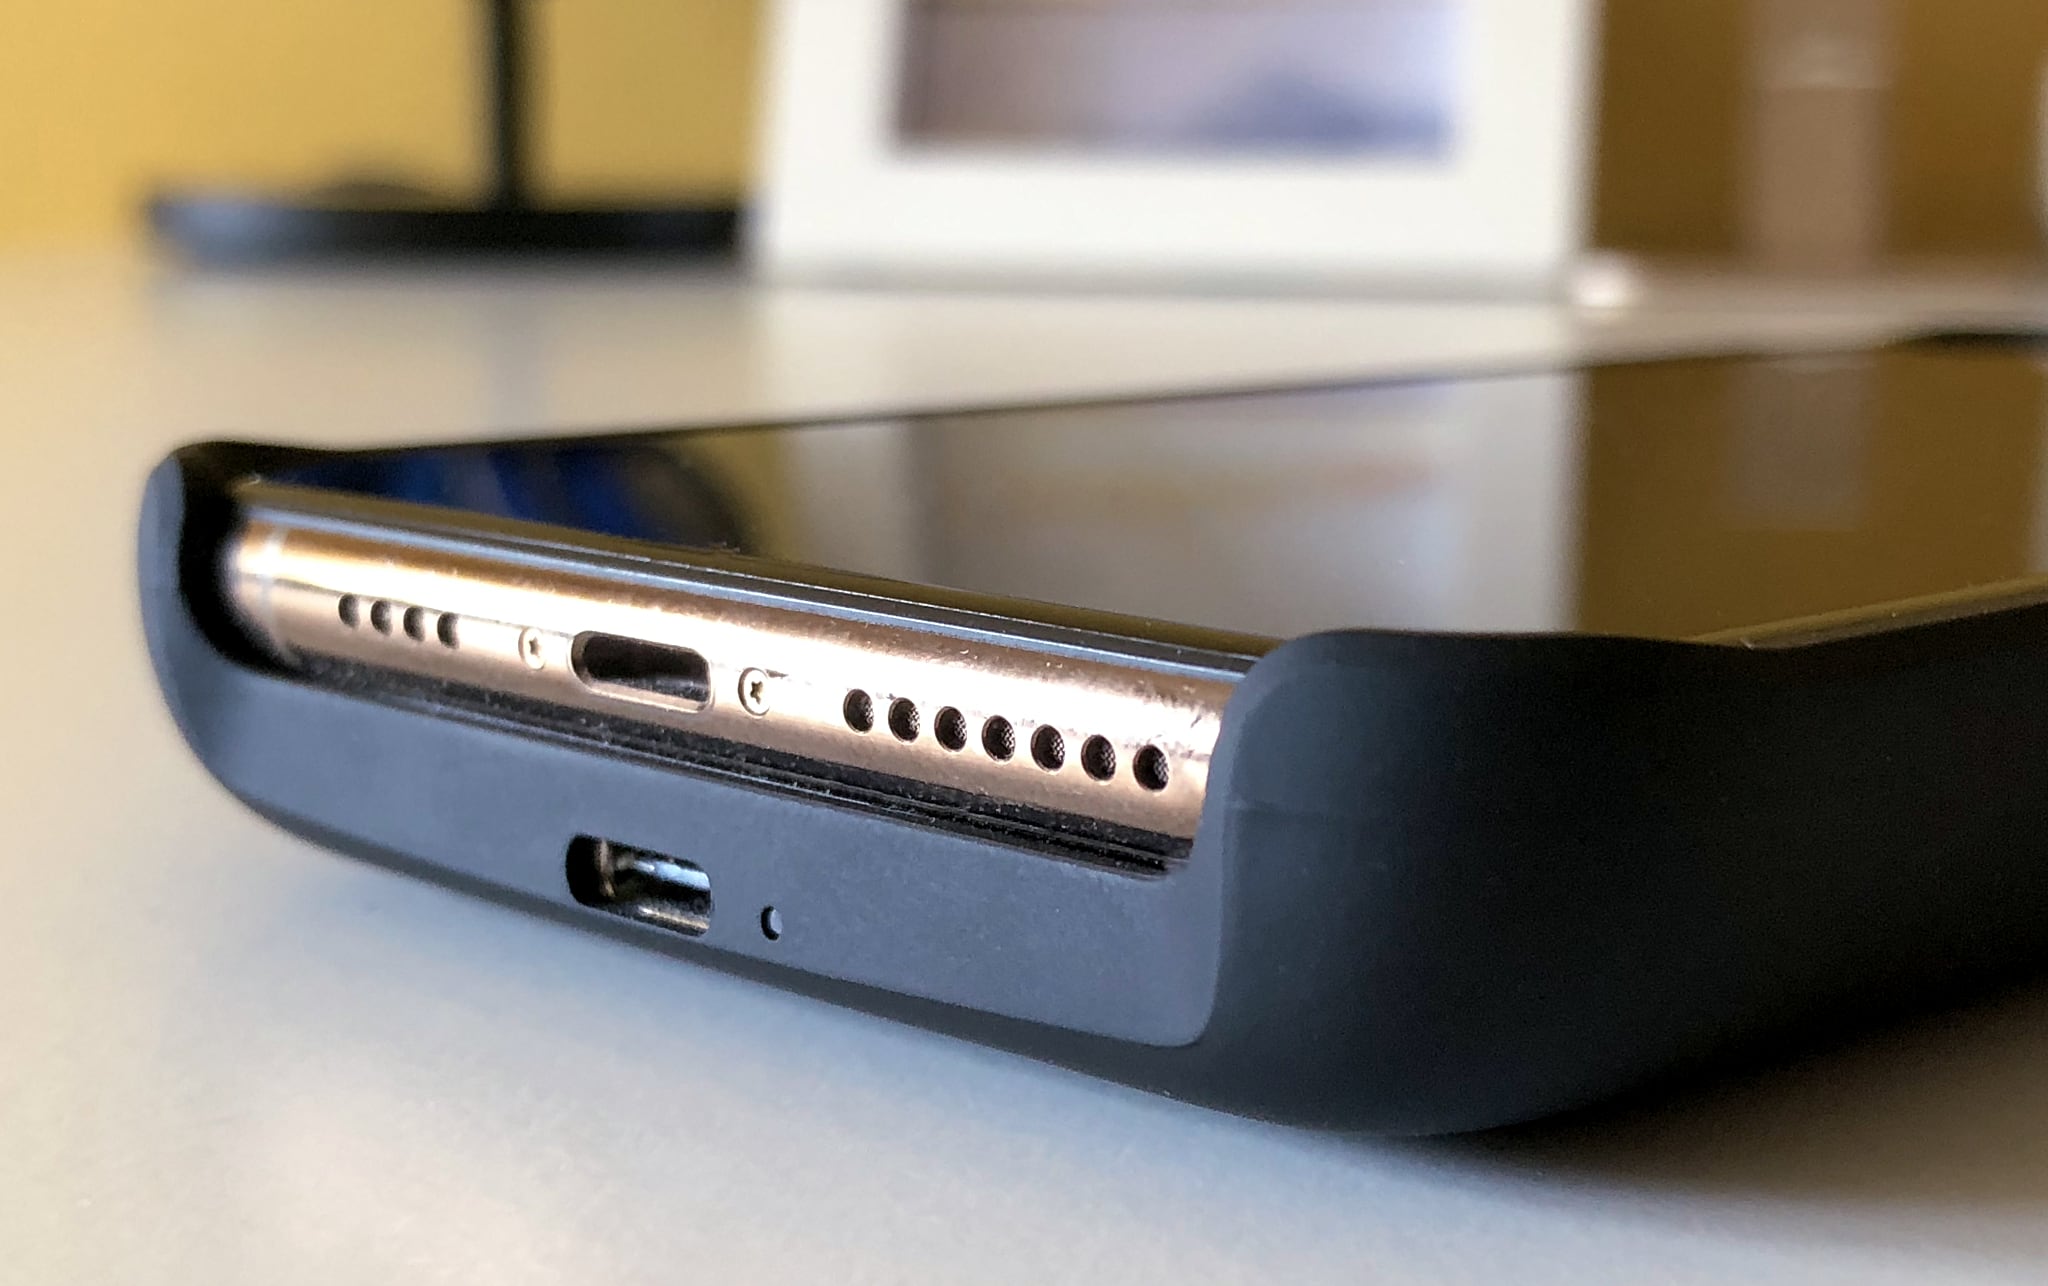 mophie-space-pack-station-add-storage-to-ipad-and-iphone